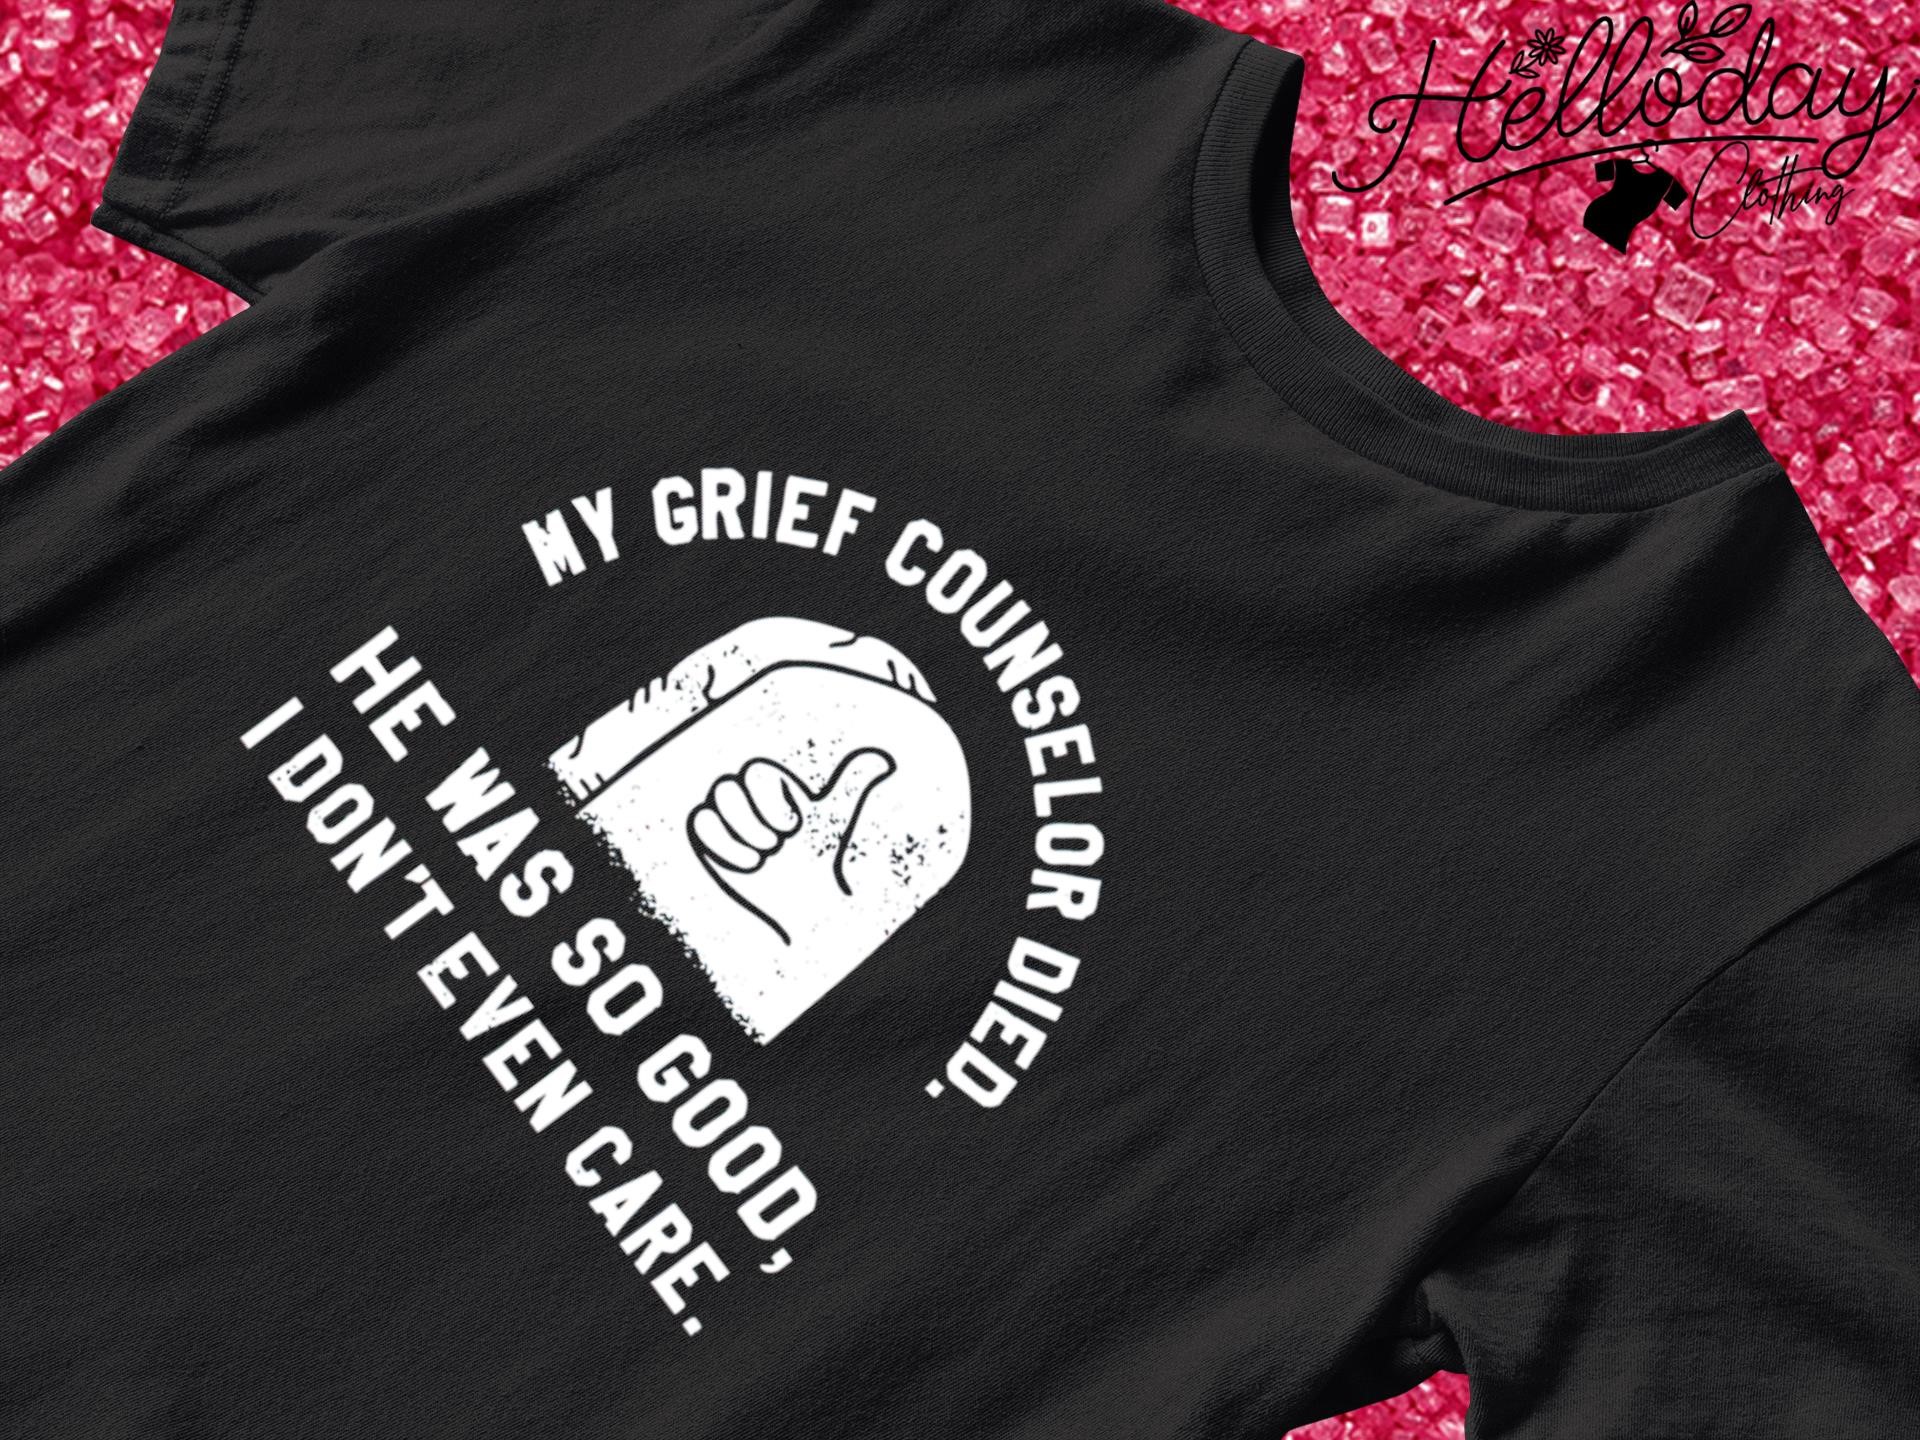 My grief counselor died he was so good I don't even care shirt